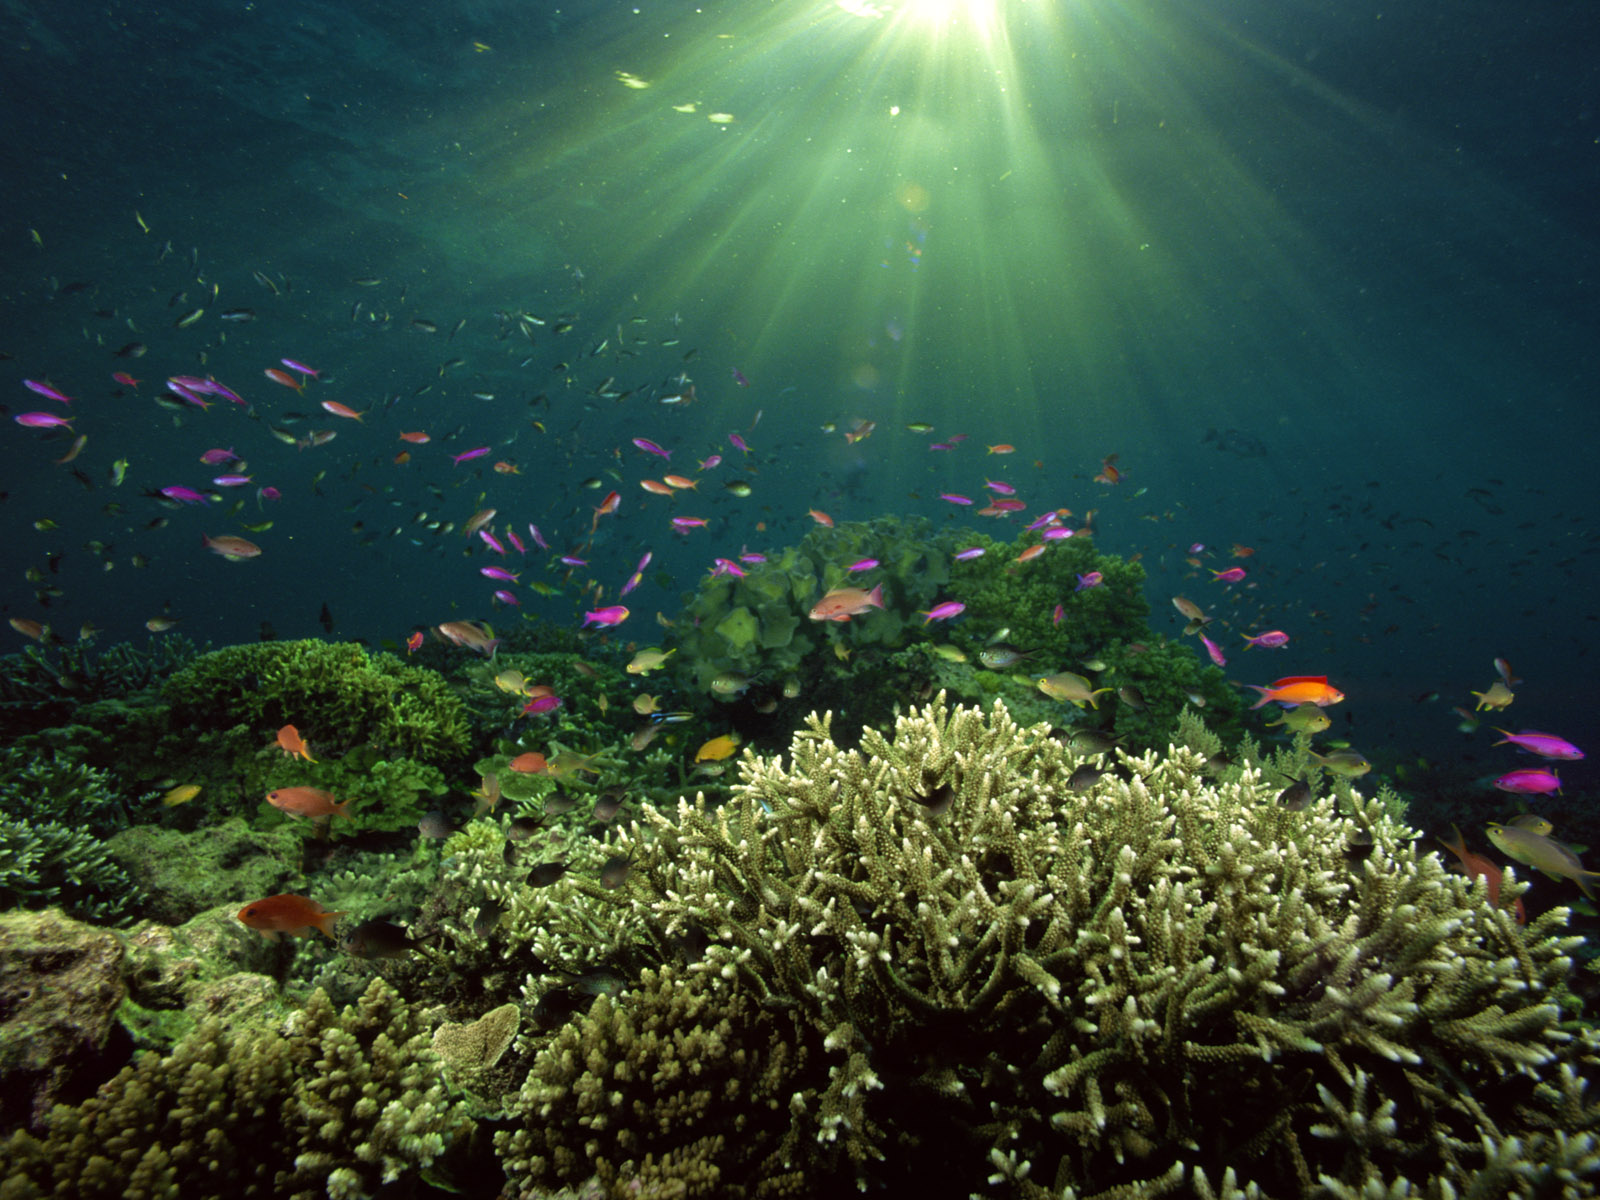 Underwater Sea Fishes Hd Wallpapers Npicx We Share Afalchi Free images wallpape [afalchi.blogspot.com]